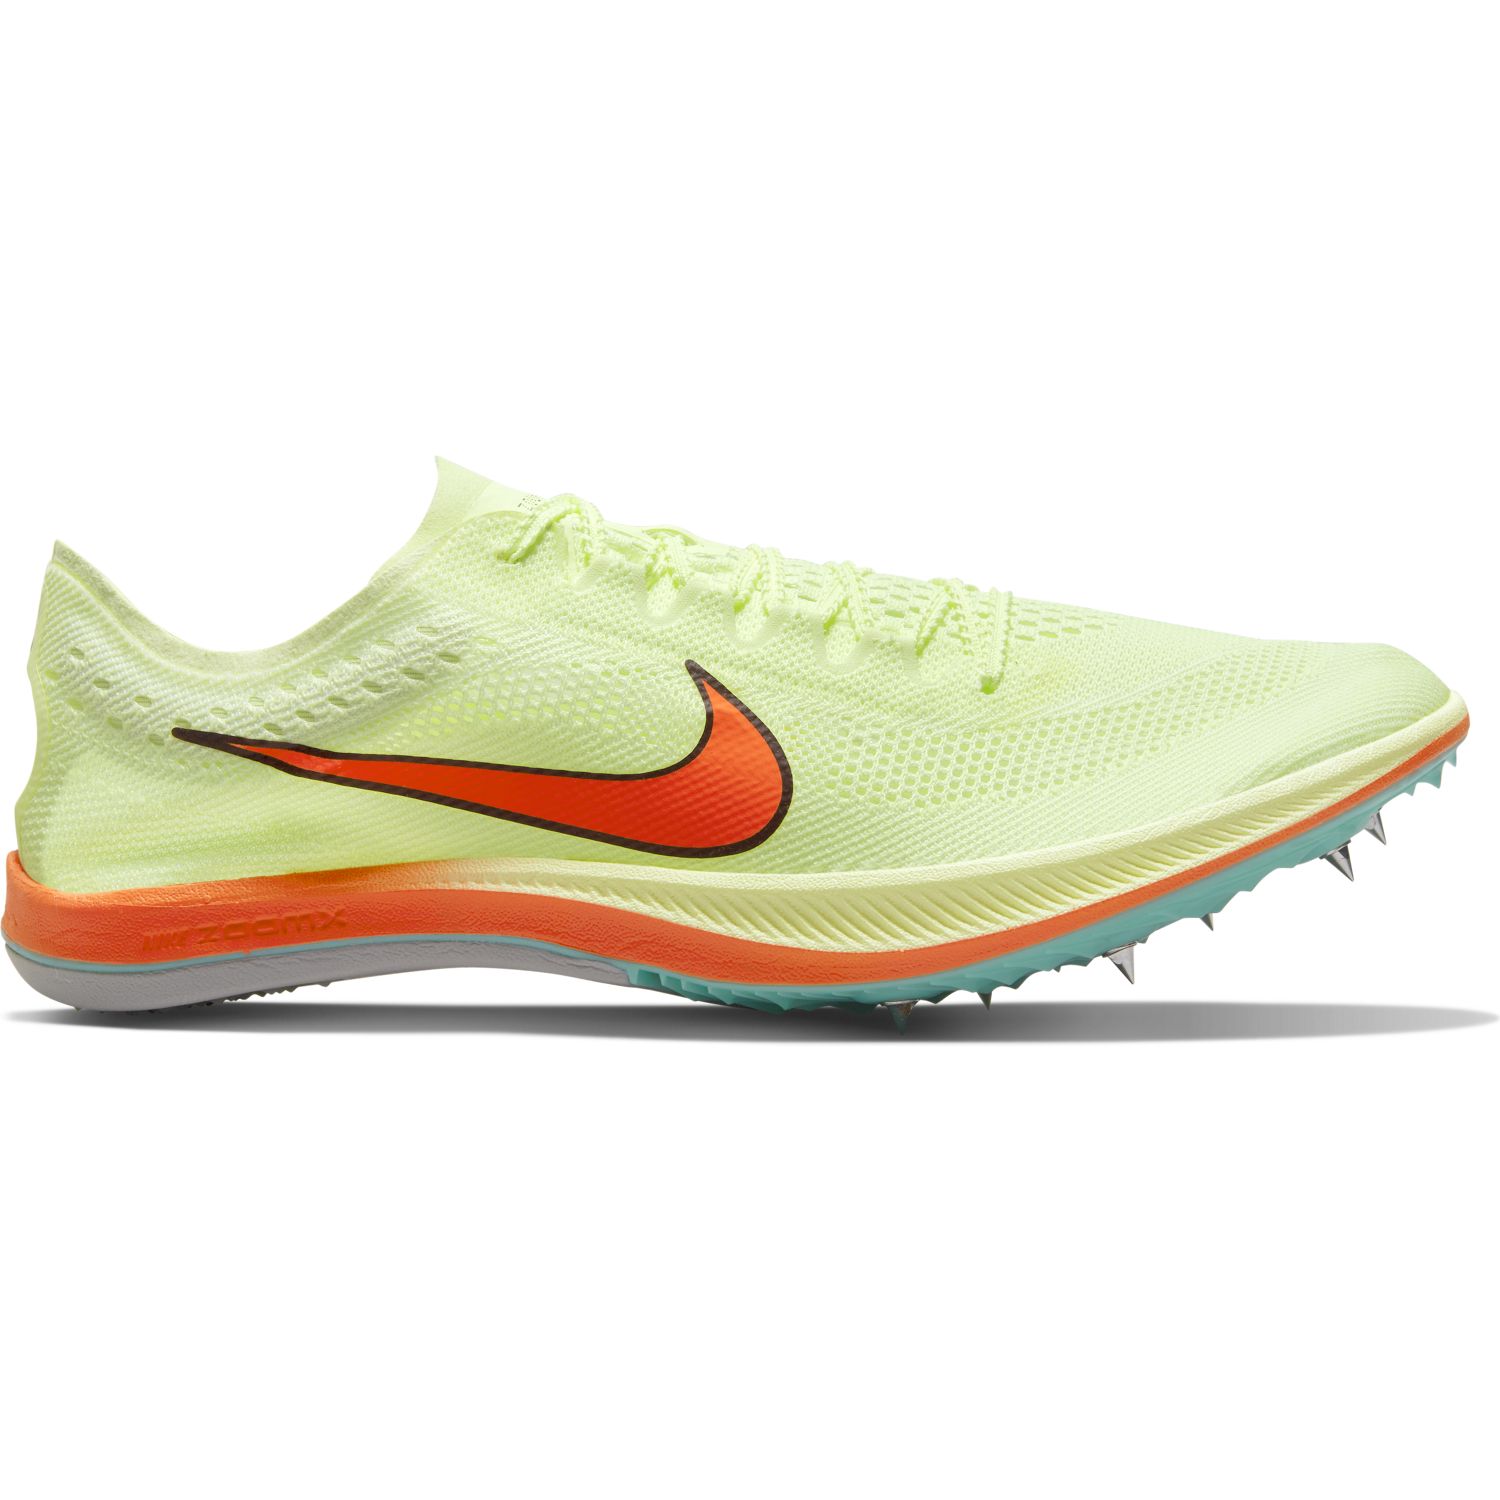 Unisex Nike ZoomX Dragonfly The Running Company Running Shoe Specialists